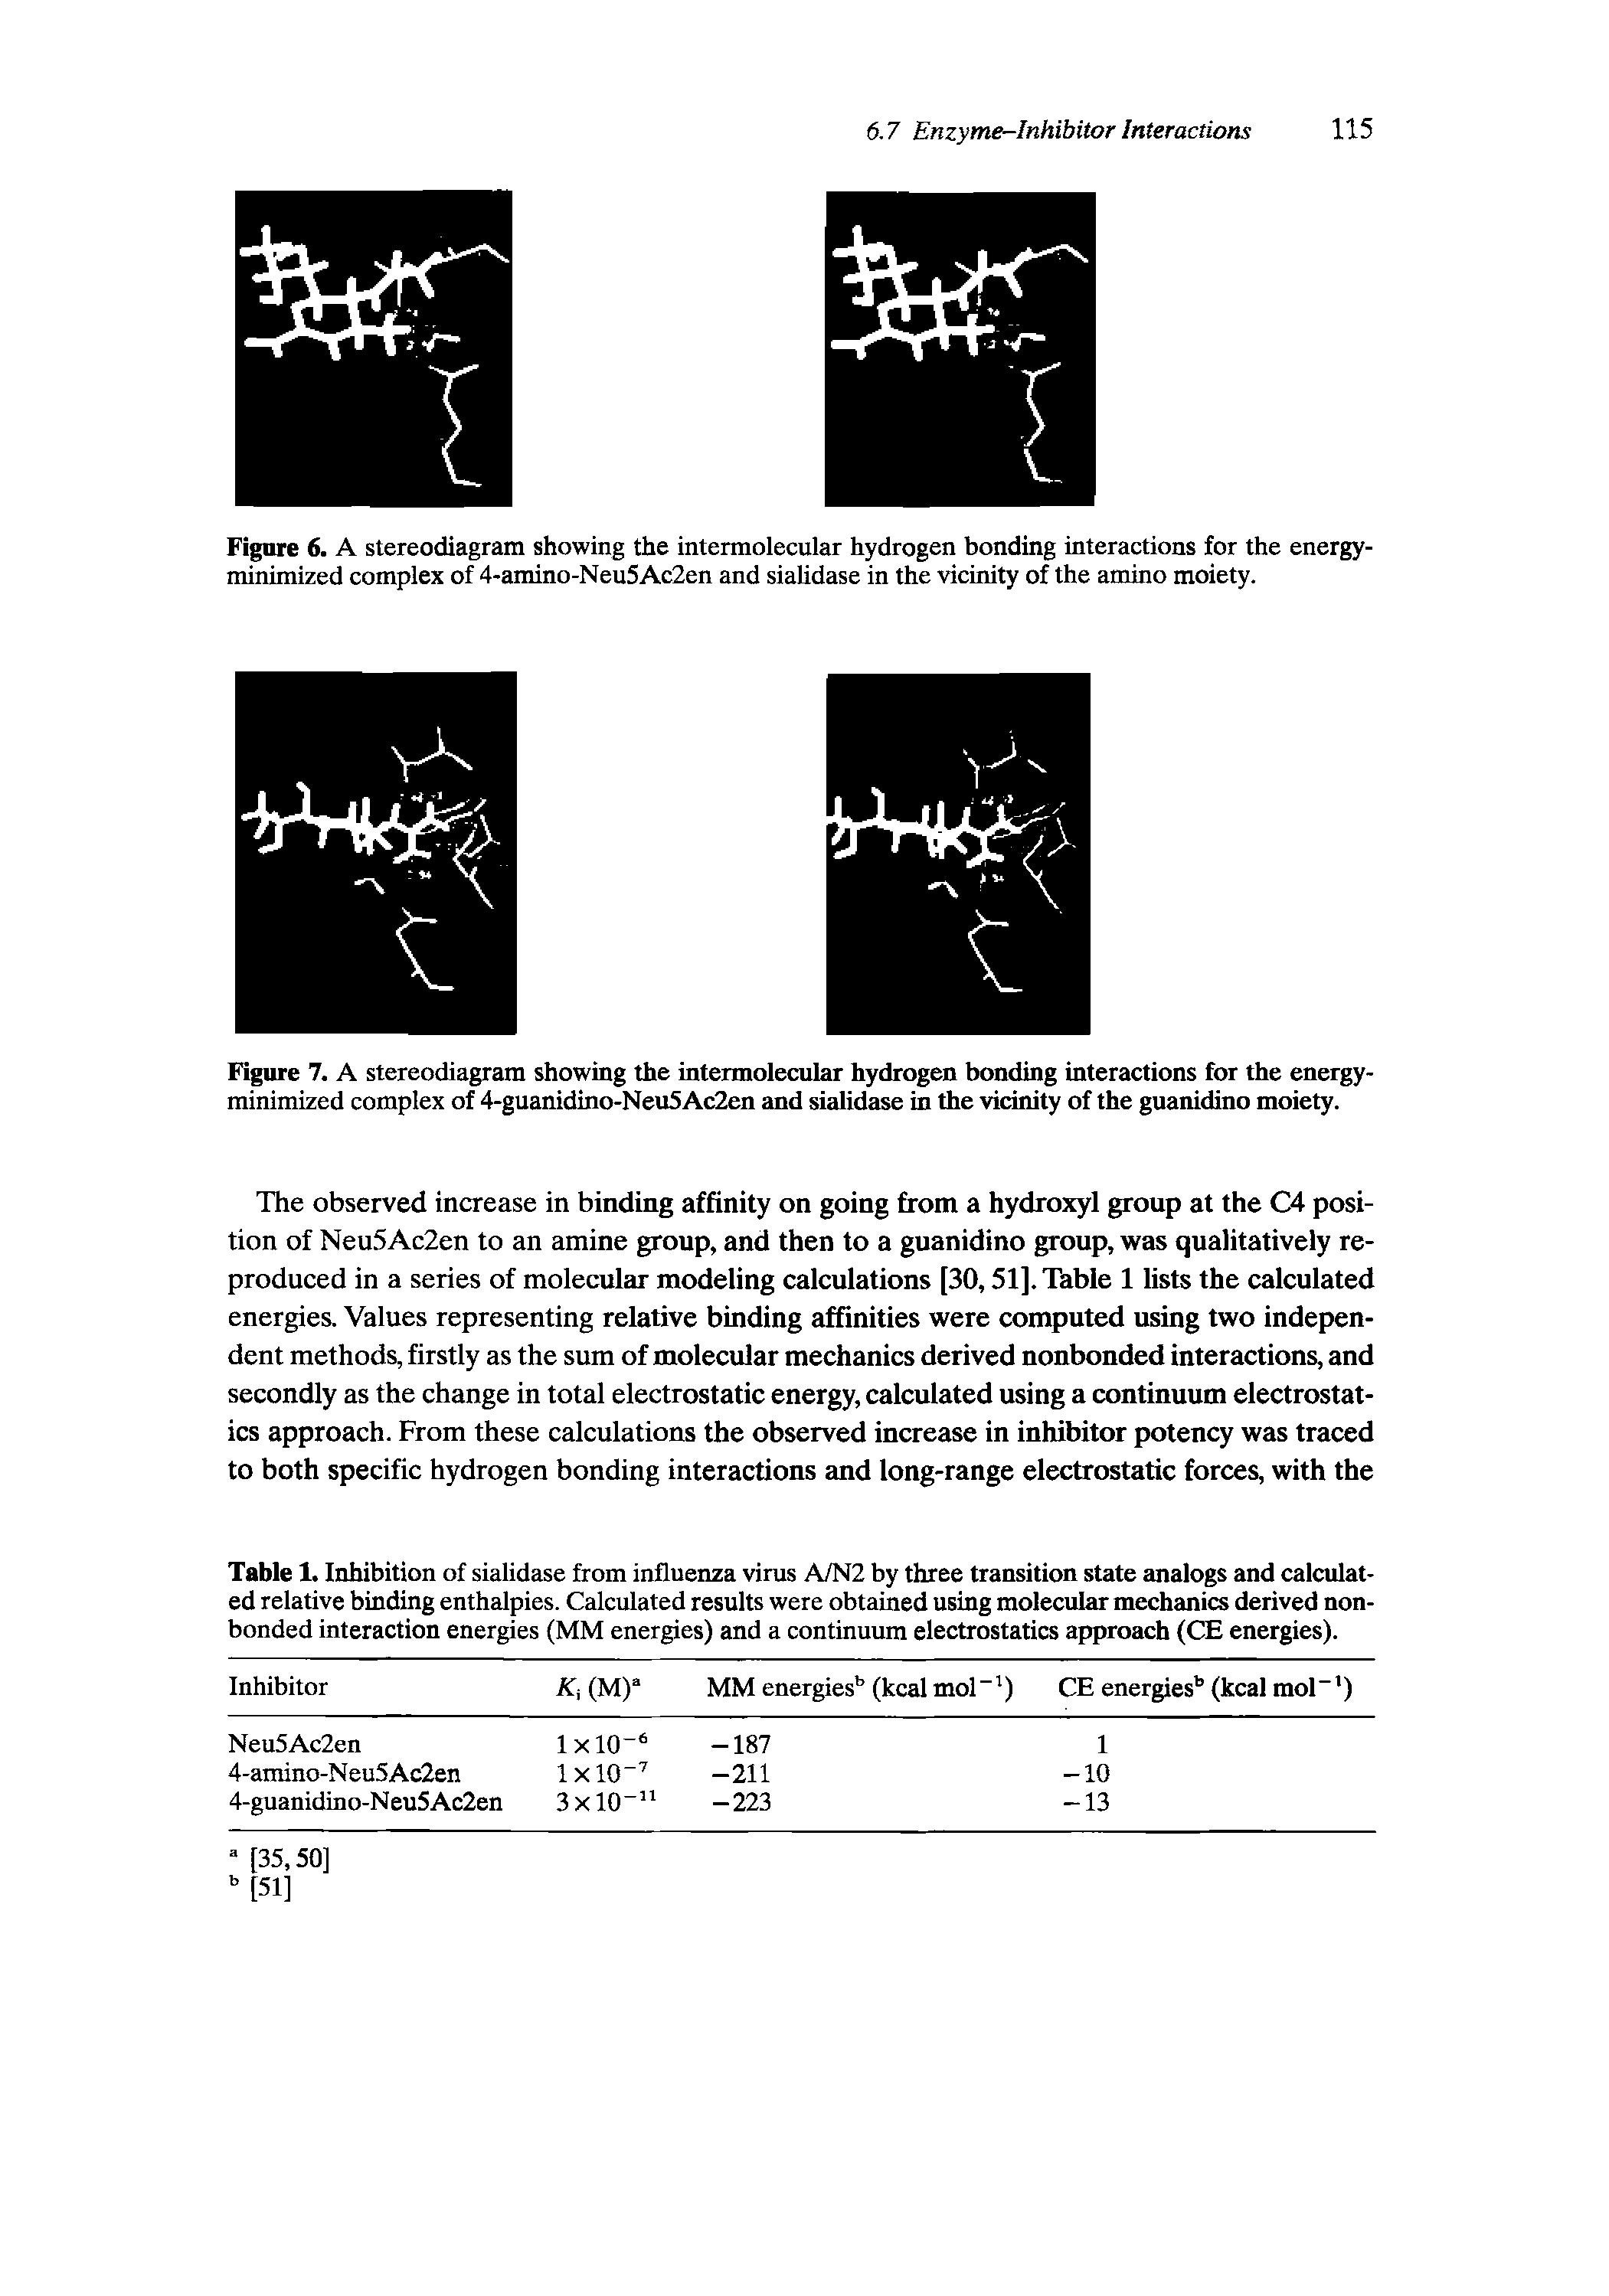 Table 1. Inhibition of sialidase from influenza virus A/N2 by three transition state analogs and calculated relative binding enthalpies. Calculated results were obtained using molecular mechanics derived nonbonded interaction energies (MM energies) and a continuum electrostatics approach (CE energies).